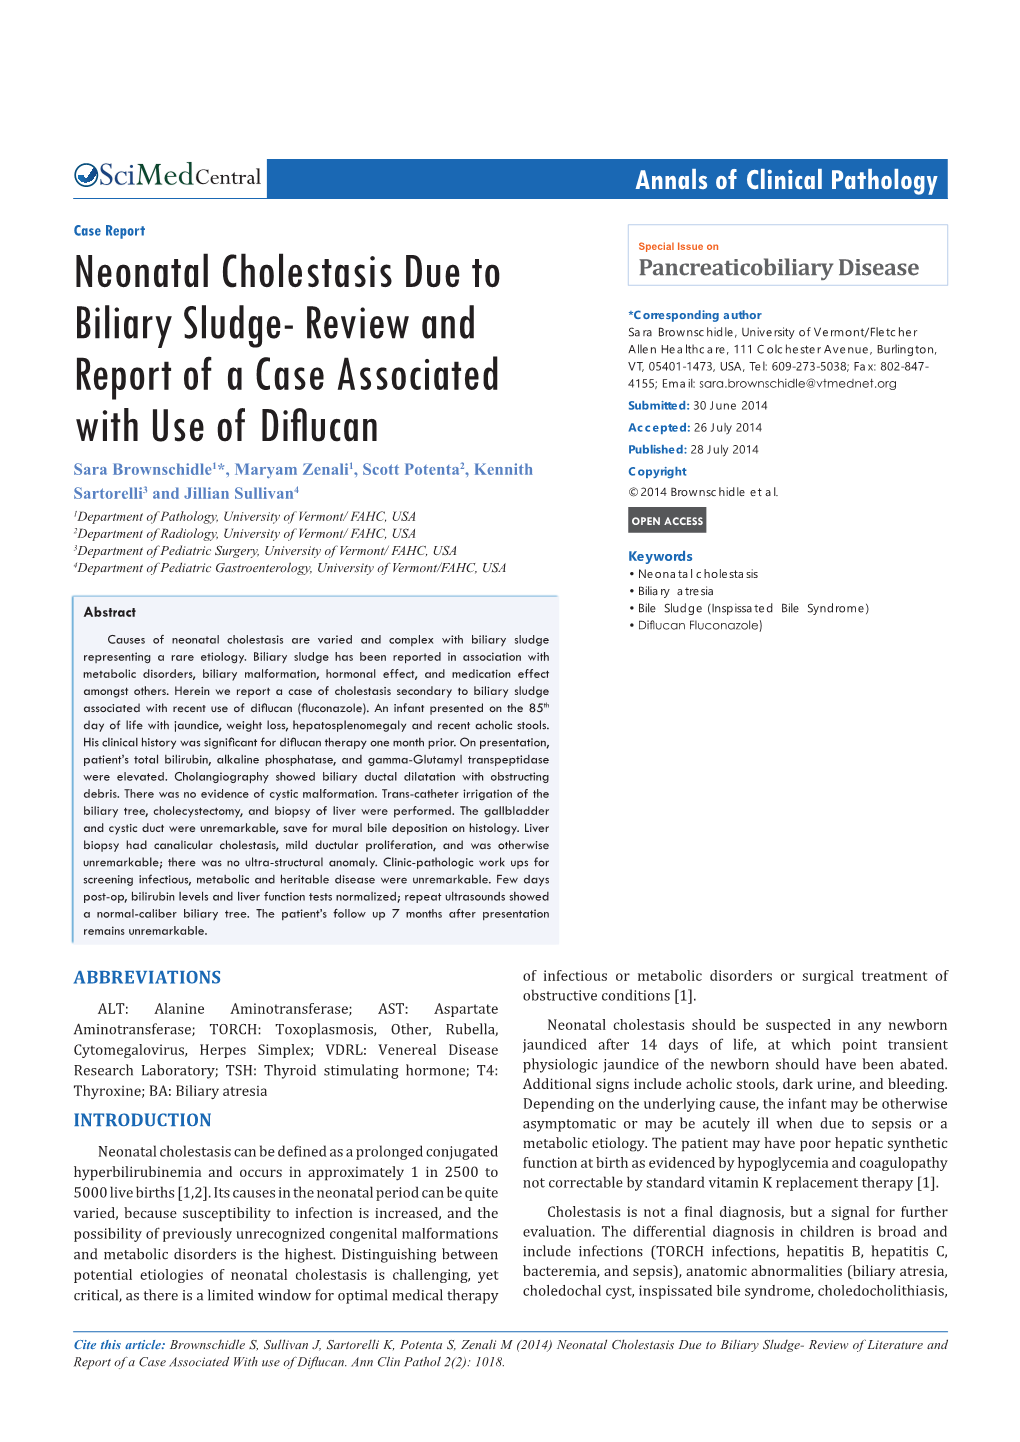 Neonatal Cholestasis Due to Biliary Sludge- Review of Literature and Report of a Case Associated with Use of Diflucan